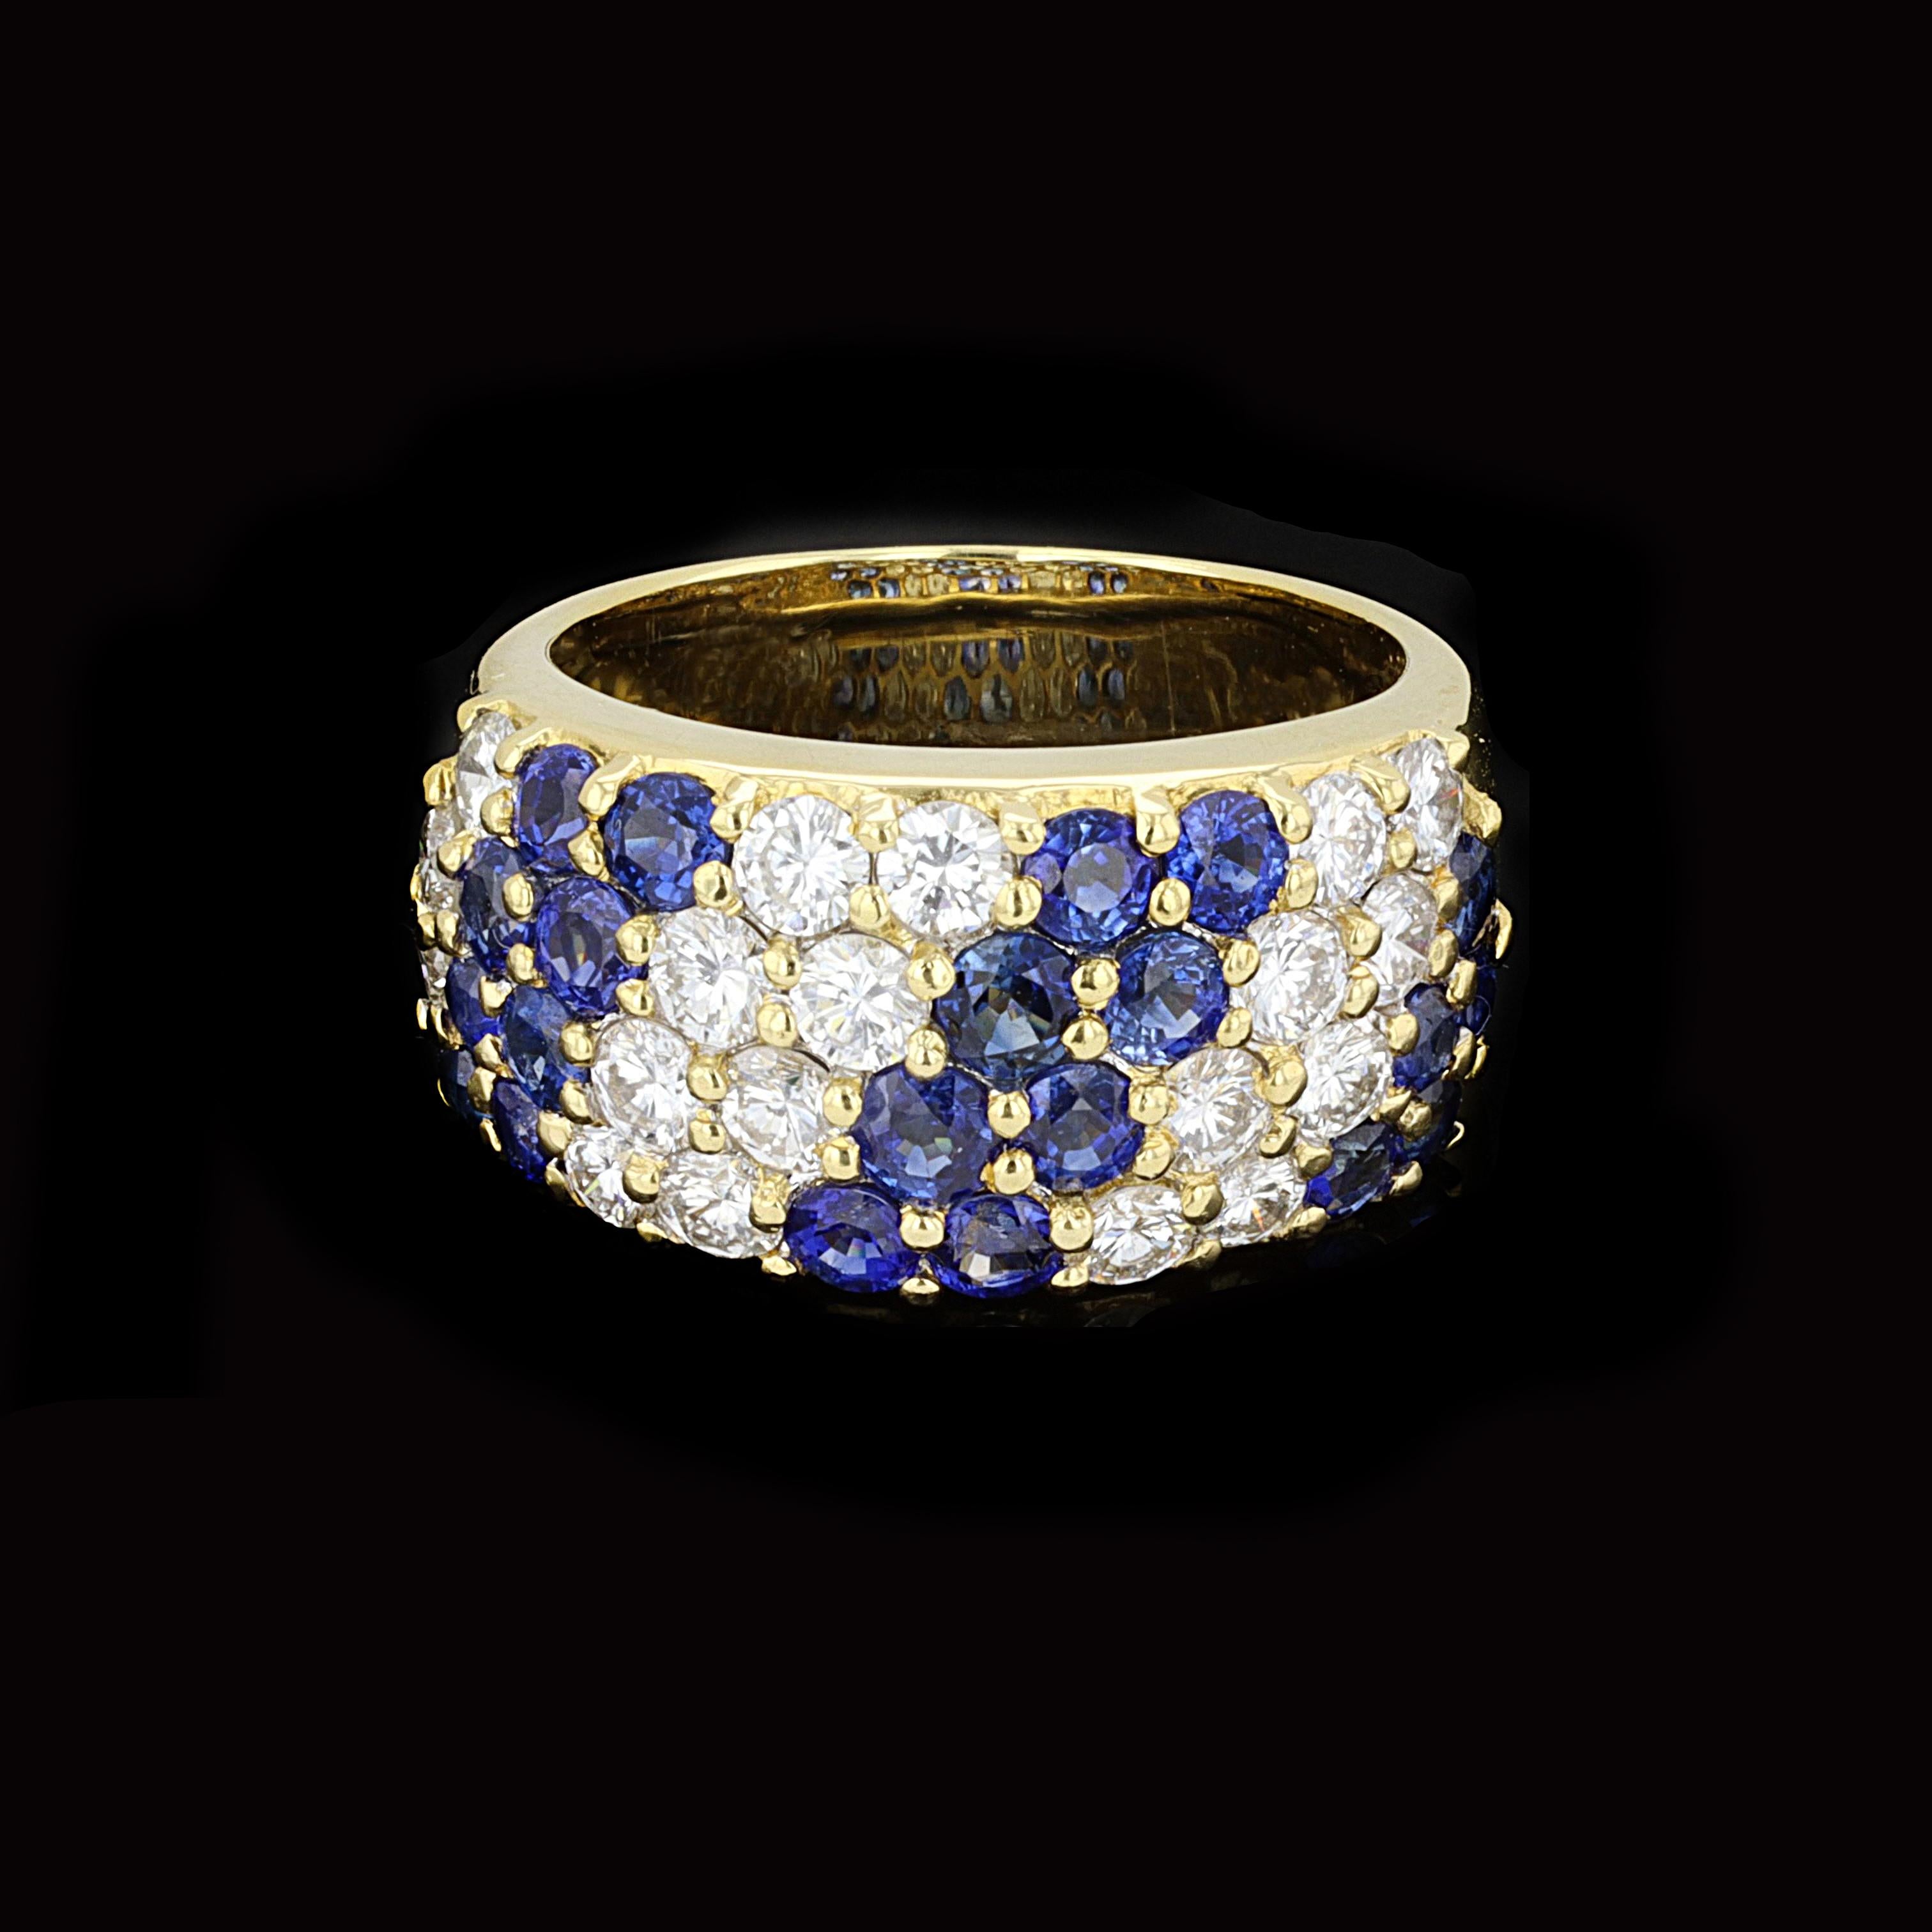 Brilliant diamonds pair with gloriously rich sapphires in a double row striped pattern to make this sophisticated 18K yellow gold estate ring pop with eye-catchng sparkle.The low profile ring is set with round cut sapphires and diamonds that weigh